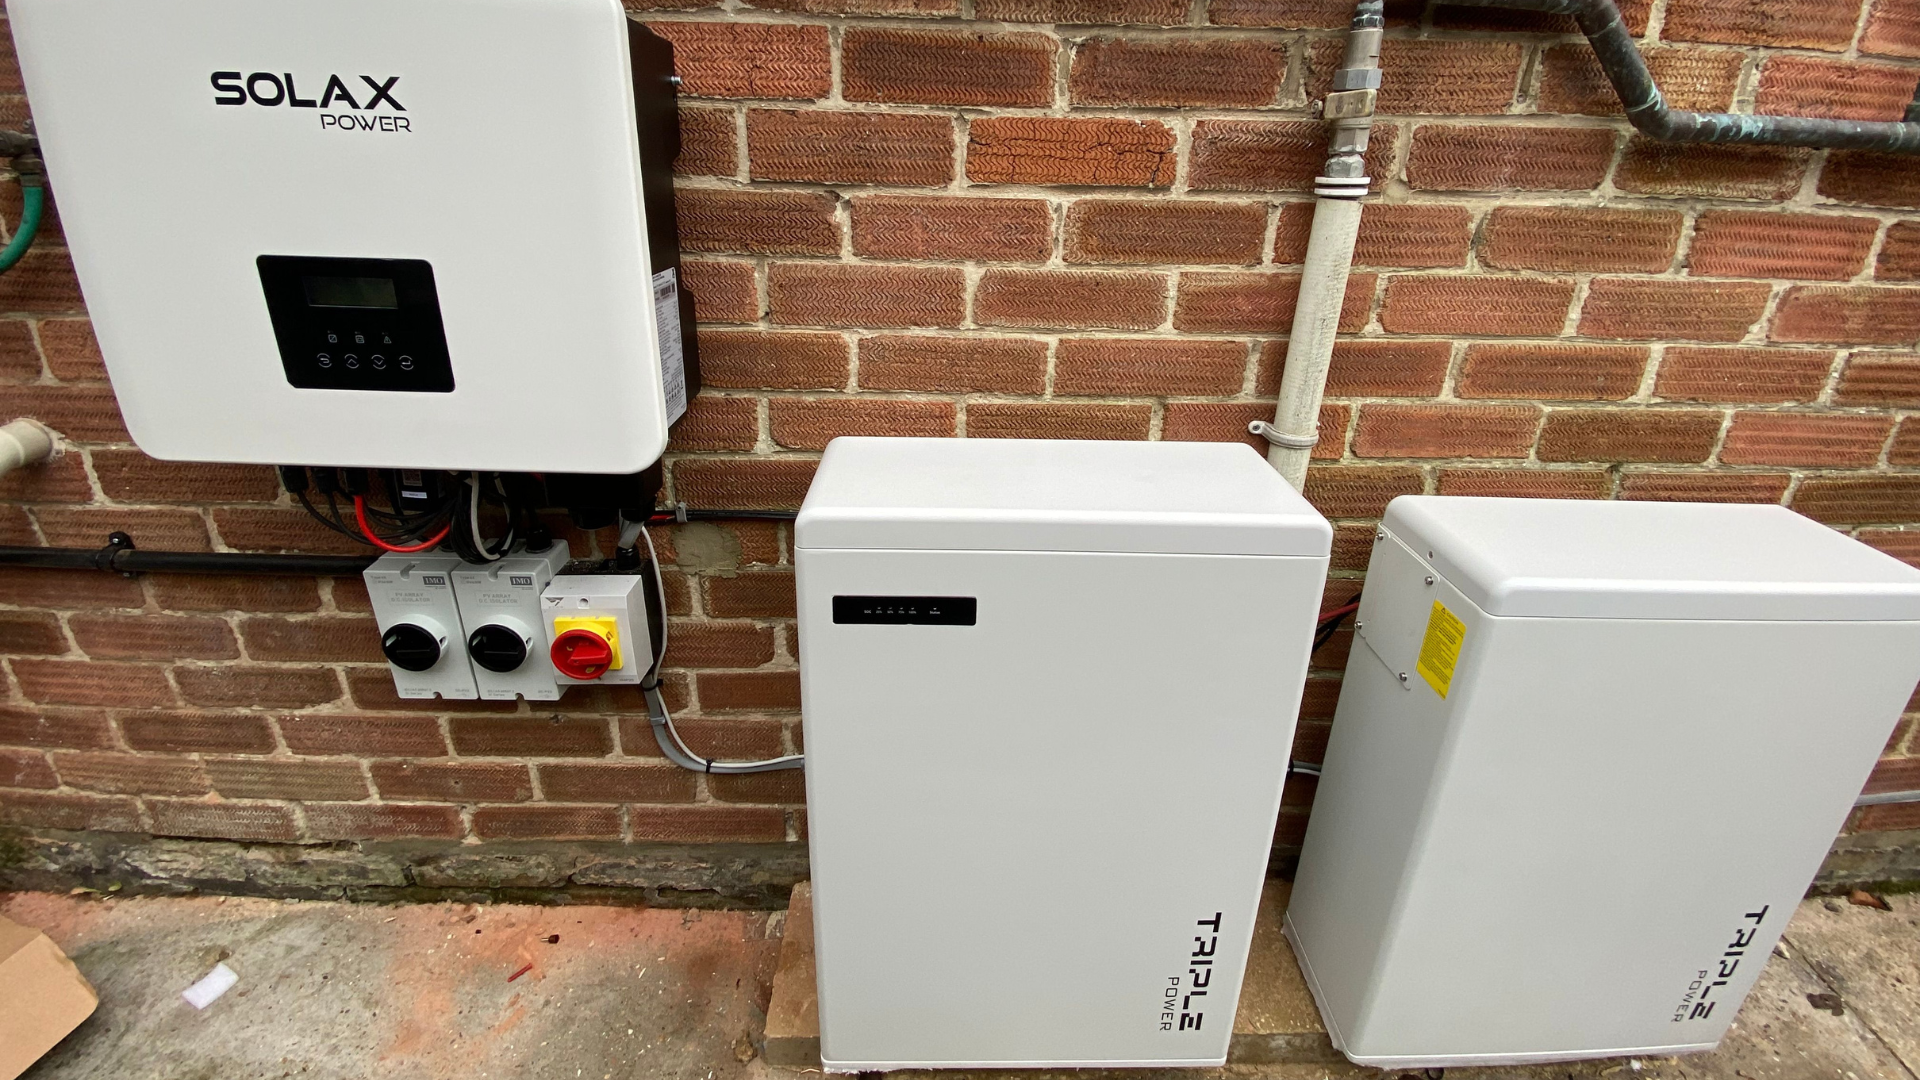 An image of a Solar PV inverter and battery install on a typical domestic property 